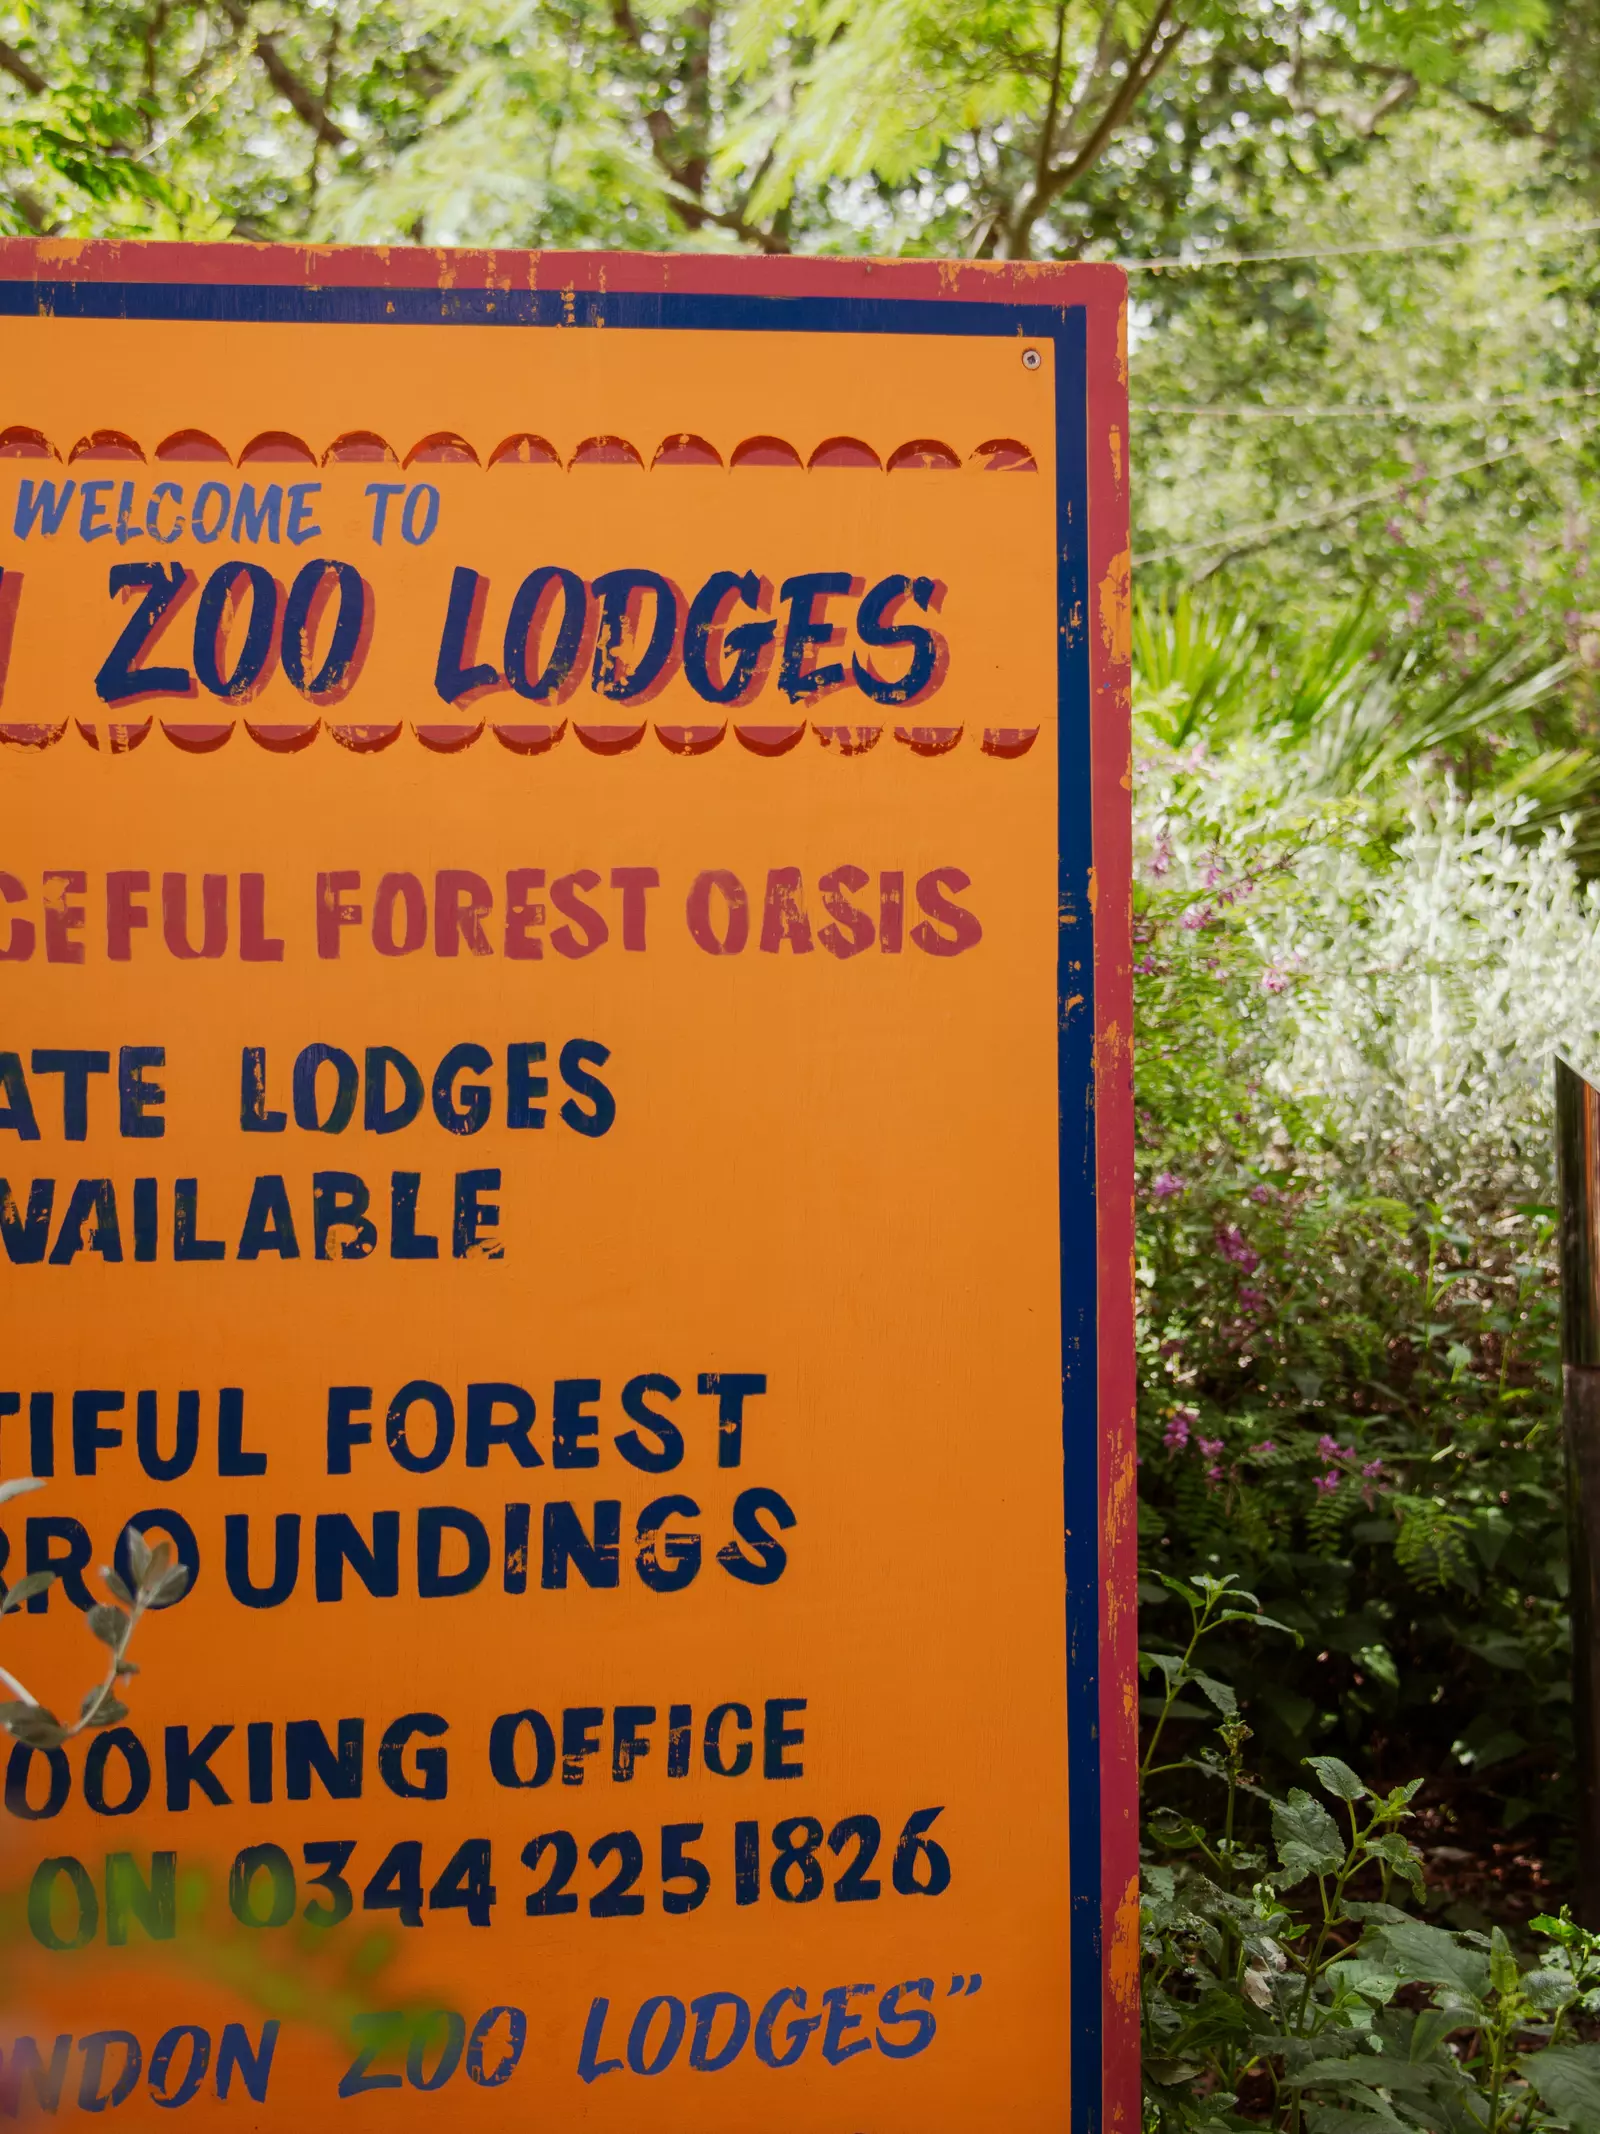 Welcome to London Zoo Lodges